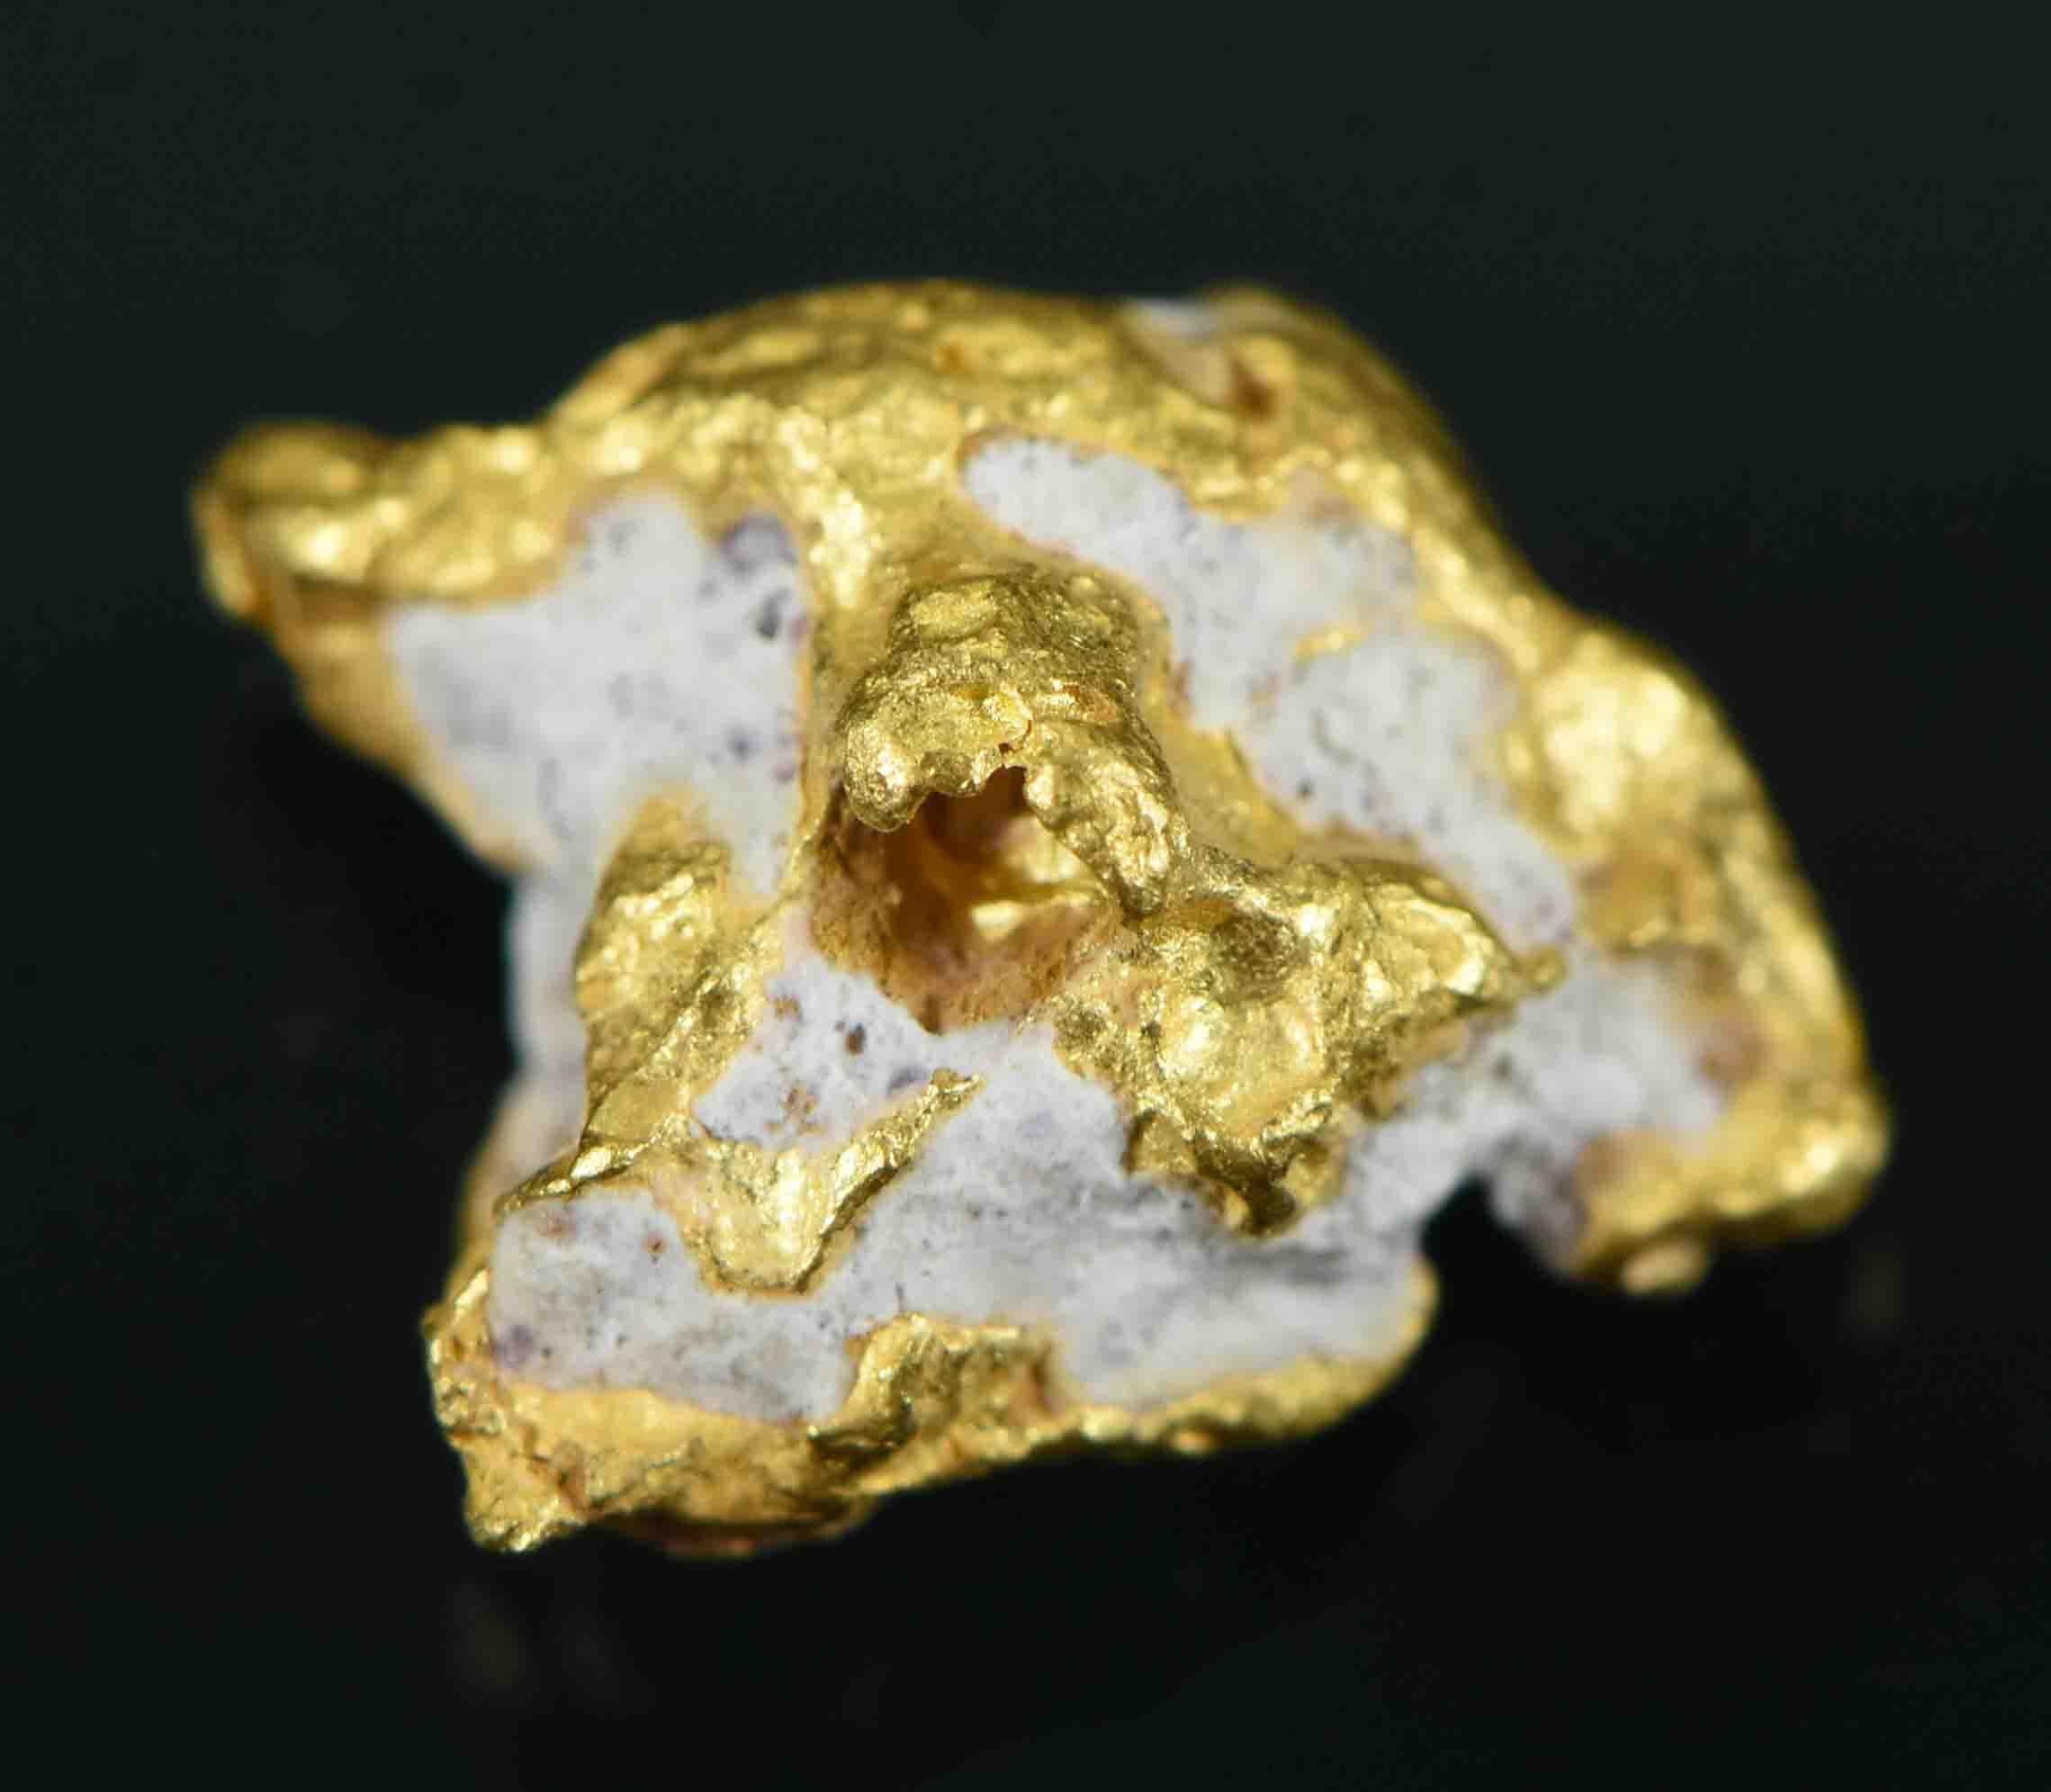 #14 Australian Natural Gold Nugget With Quartz Weighs 1.99 Grams.